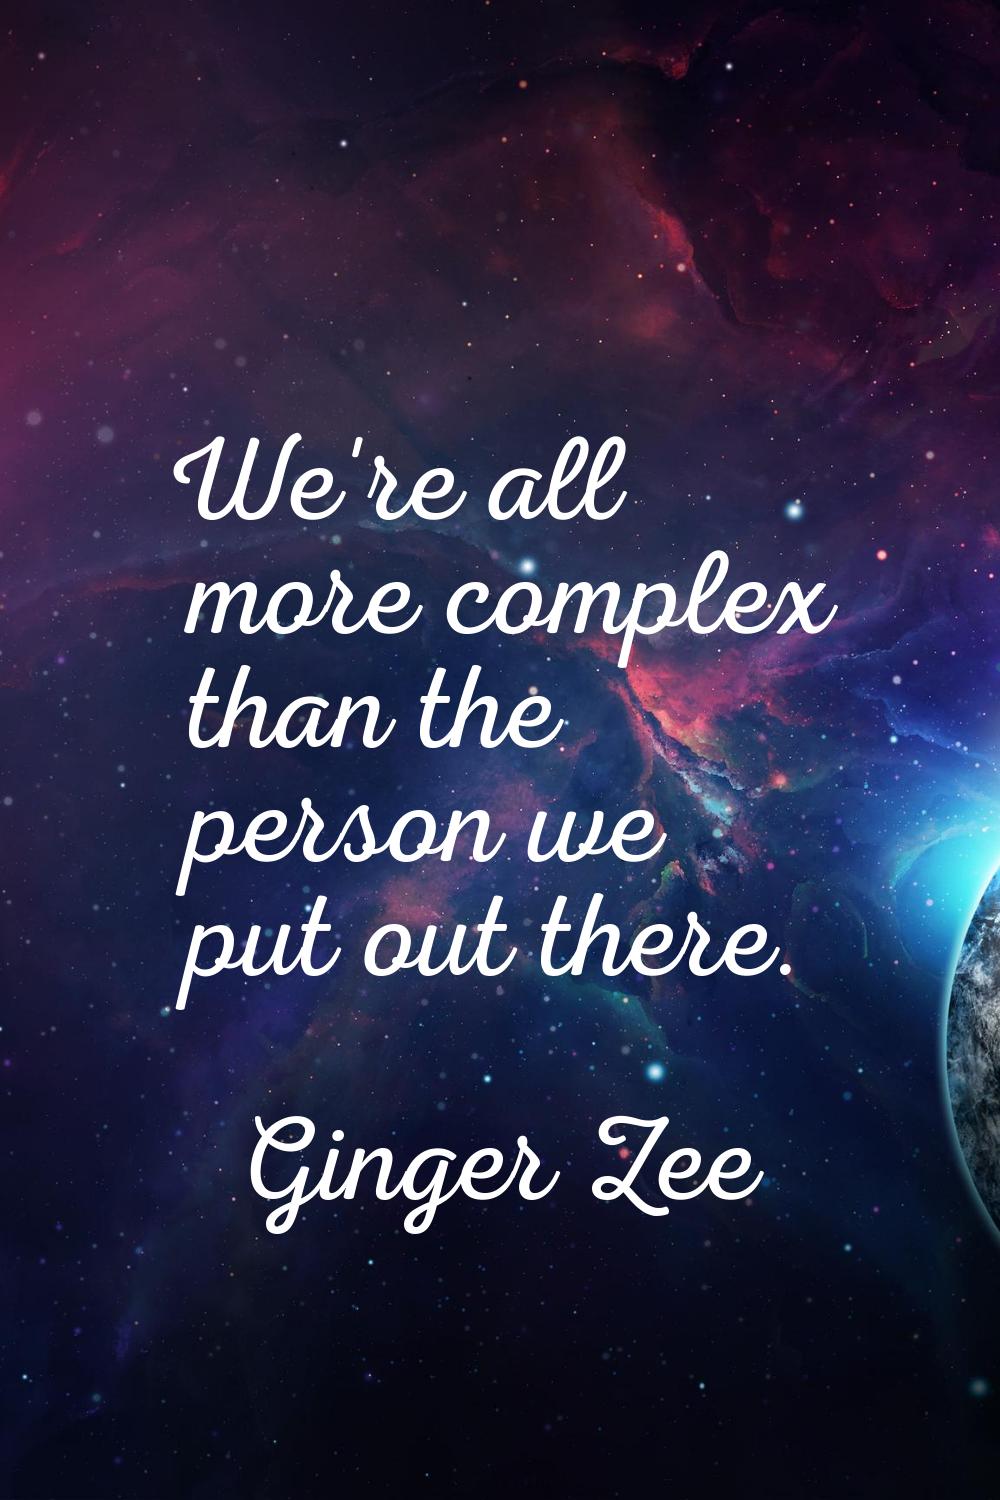 We're all more complex than the person we put out there.